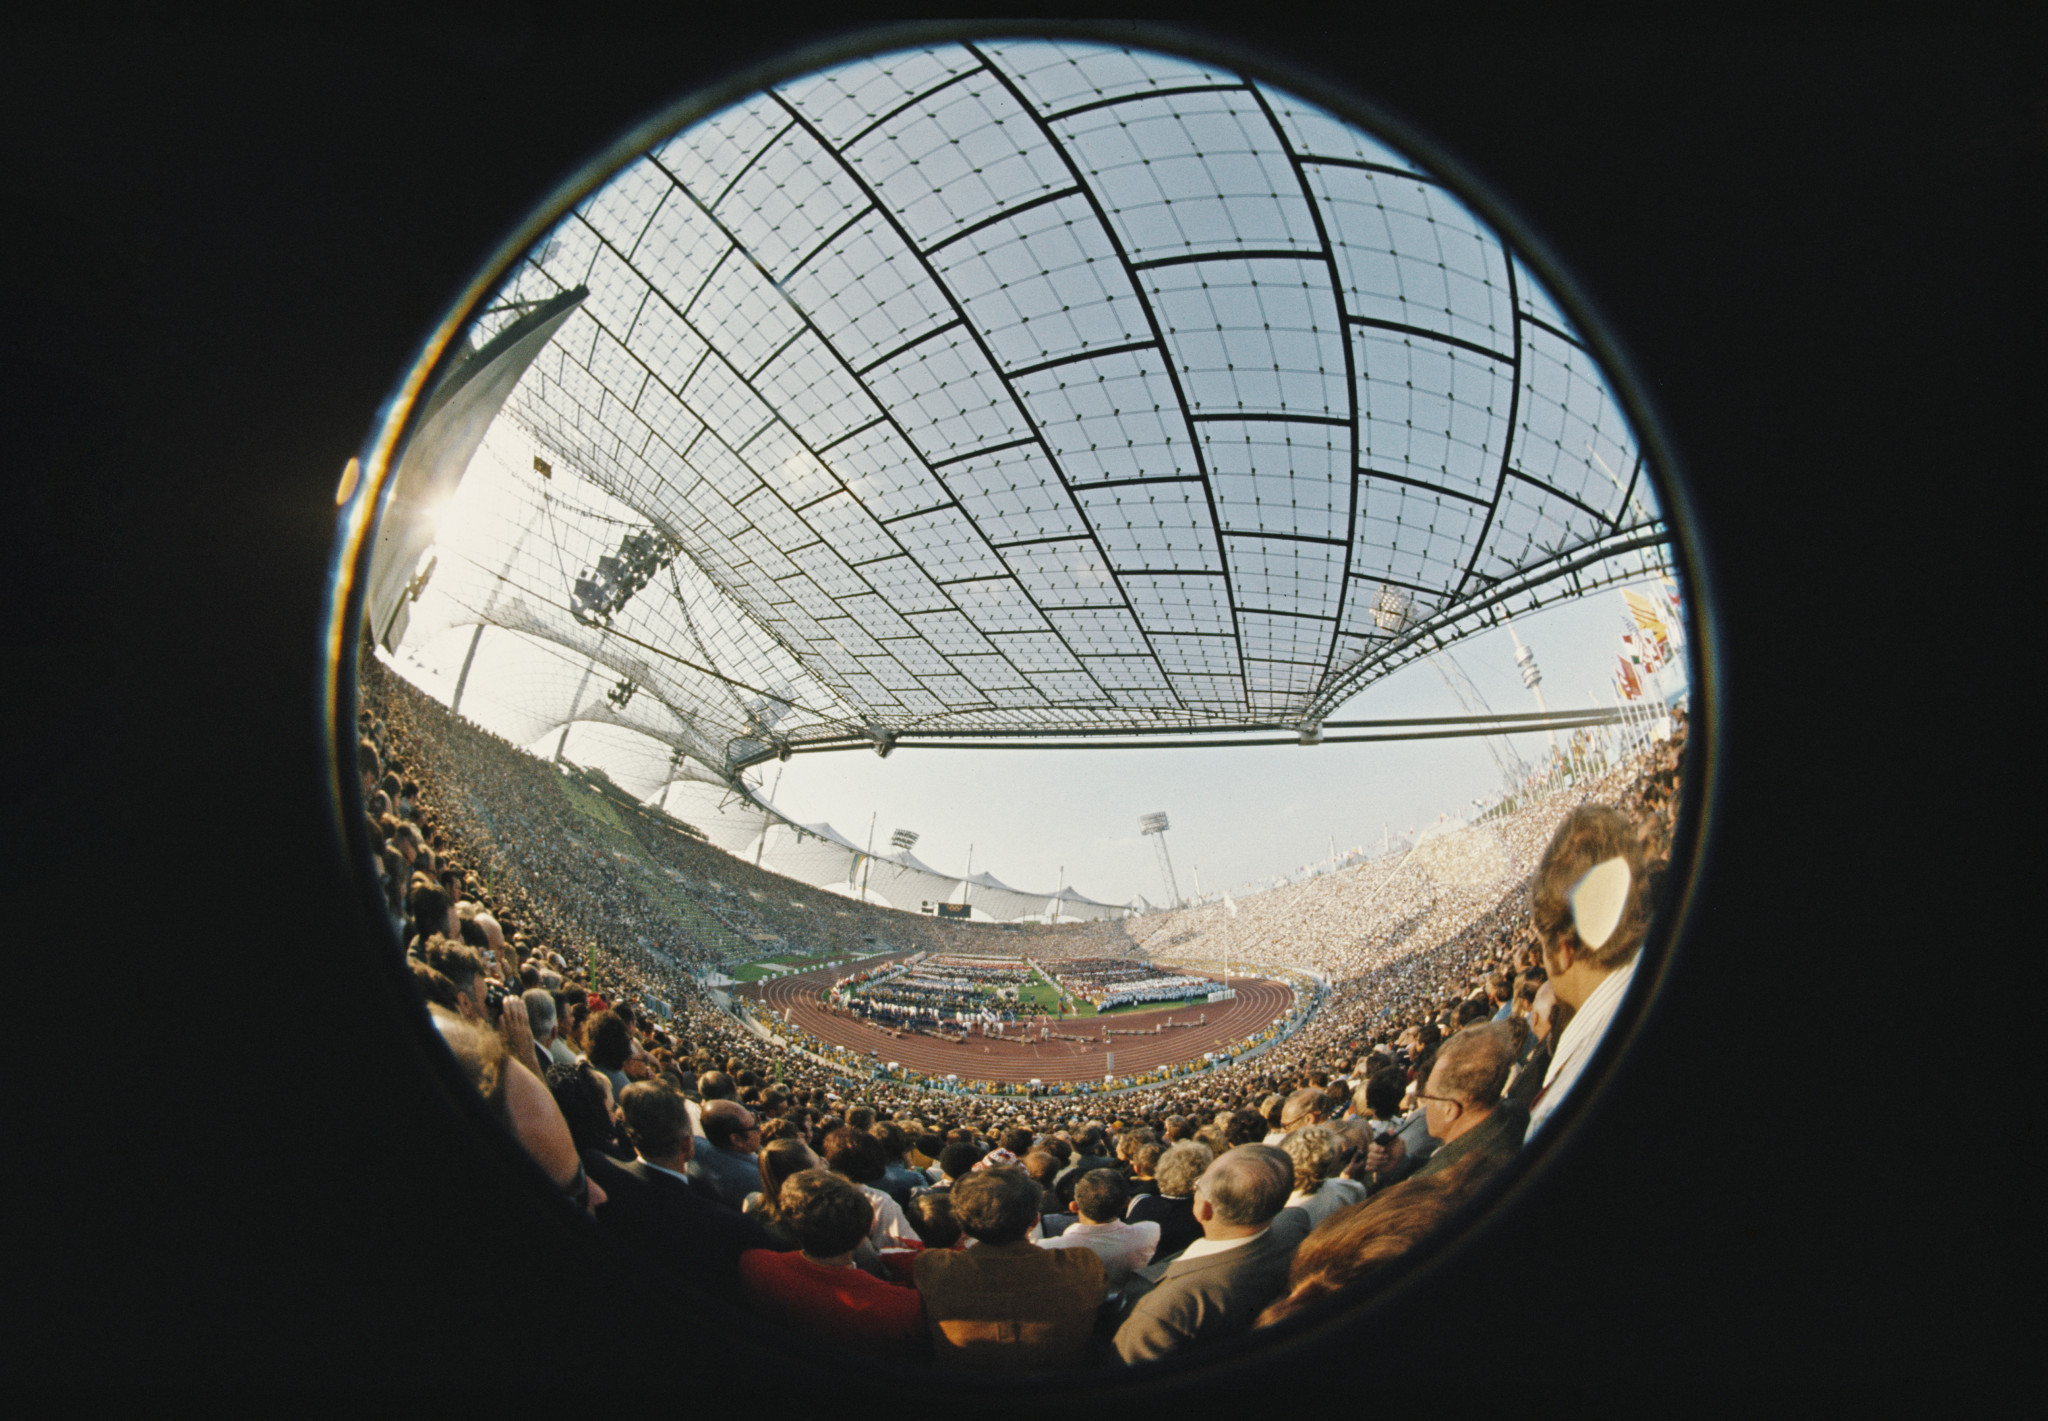 The Opening Ceremony of the 1972 Olympic Games seen through a fisheye lens ©Getty Images